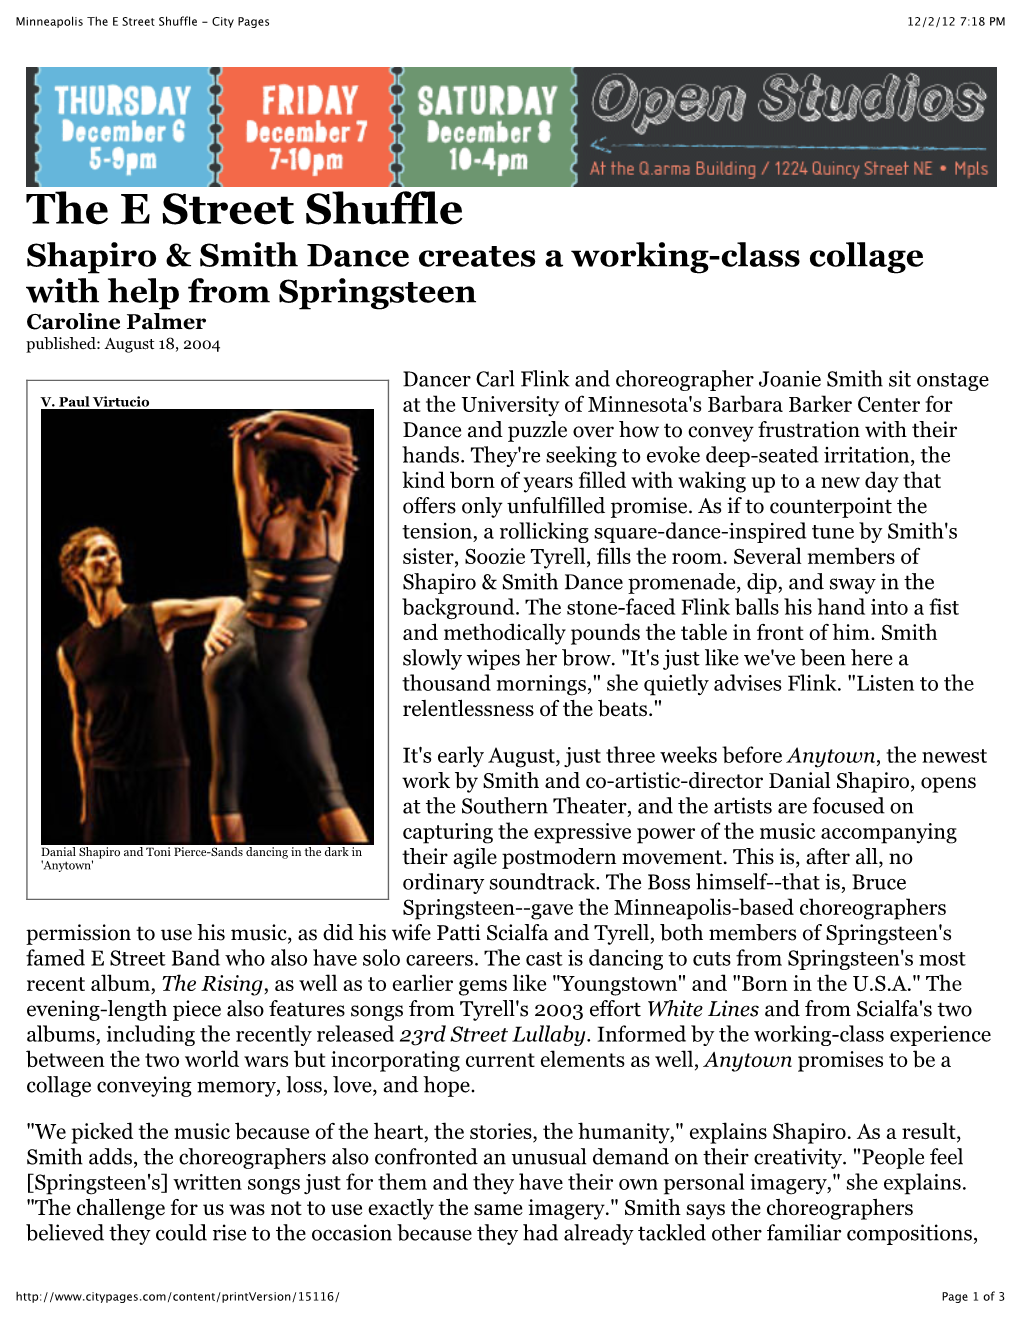 Minneapolis the E Street Shuffle - City Pages 12/2/12 7:18 PM